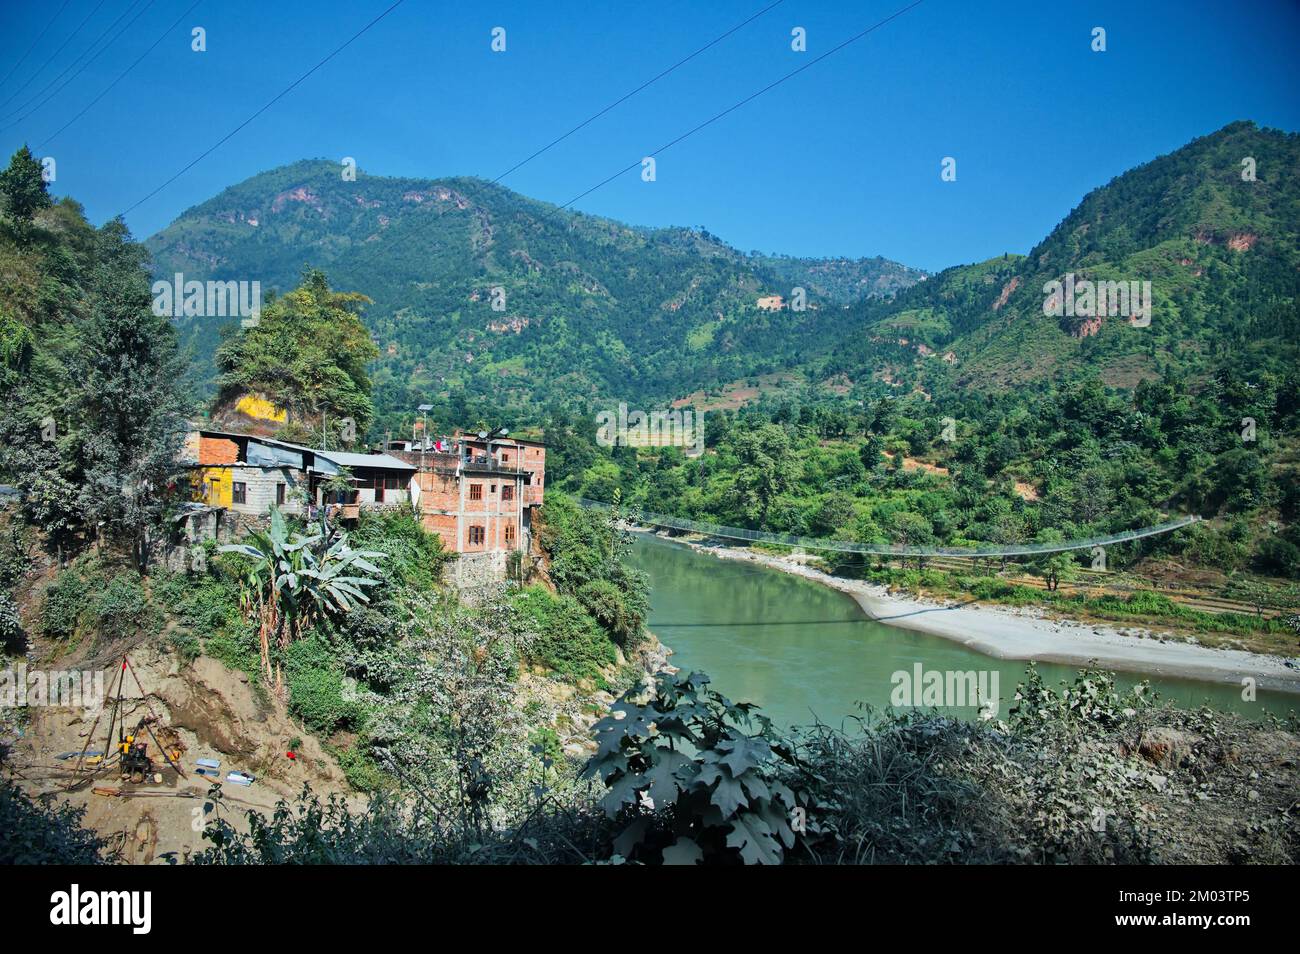 View from the bus window on the road in Nepal with the river and hanging bridge Stock Photo